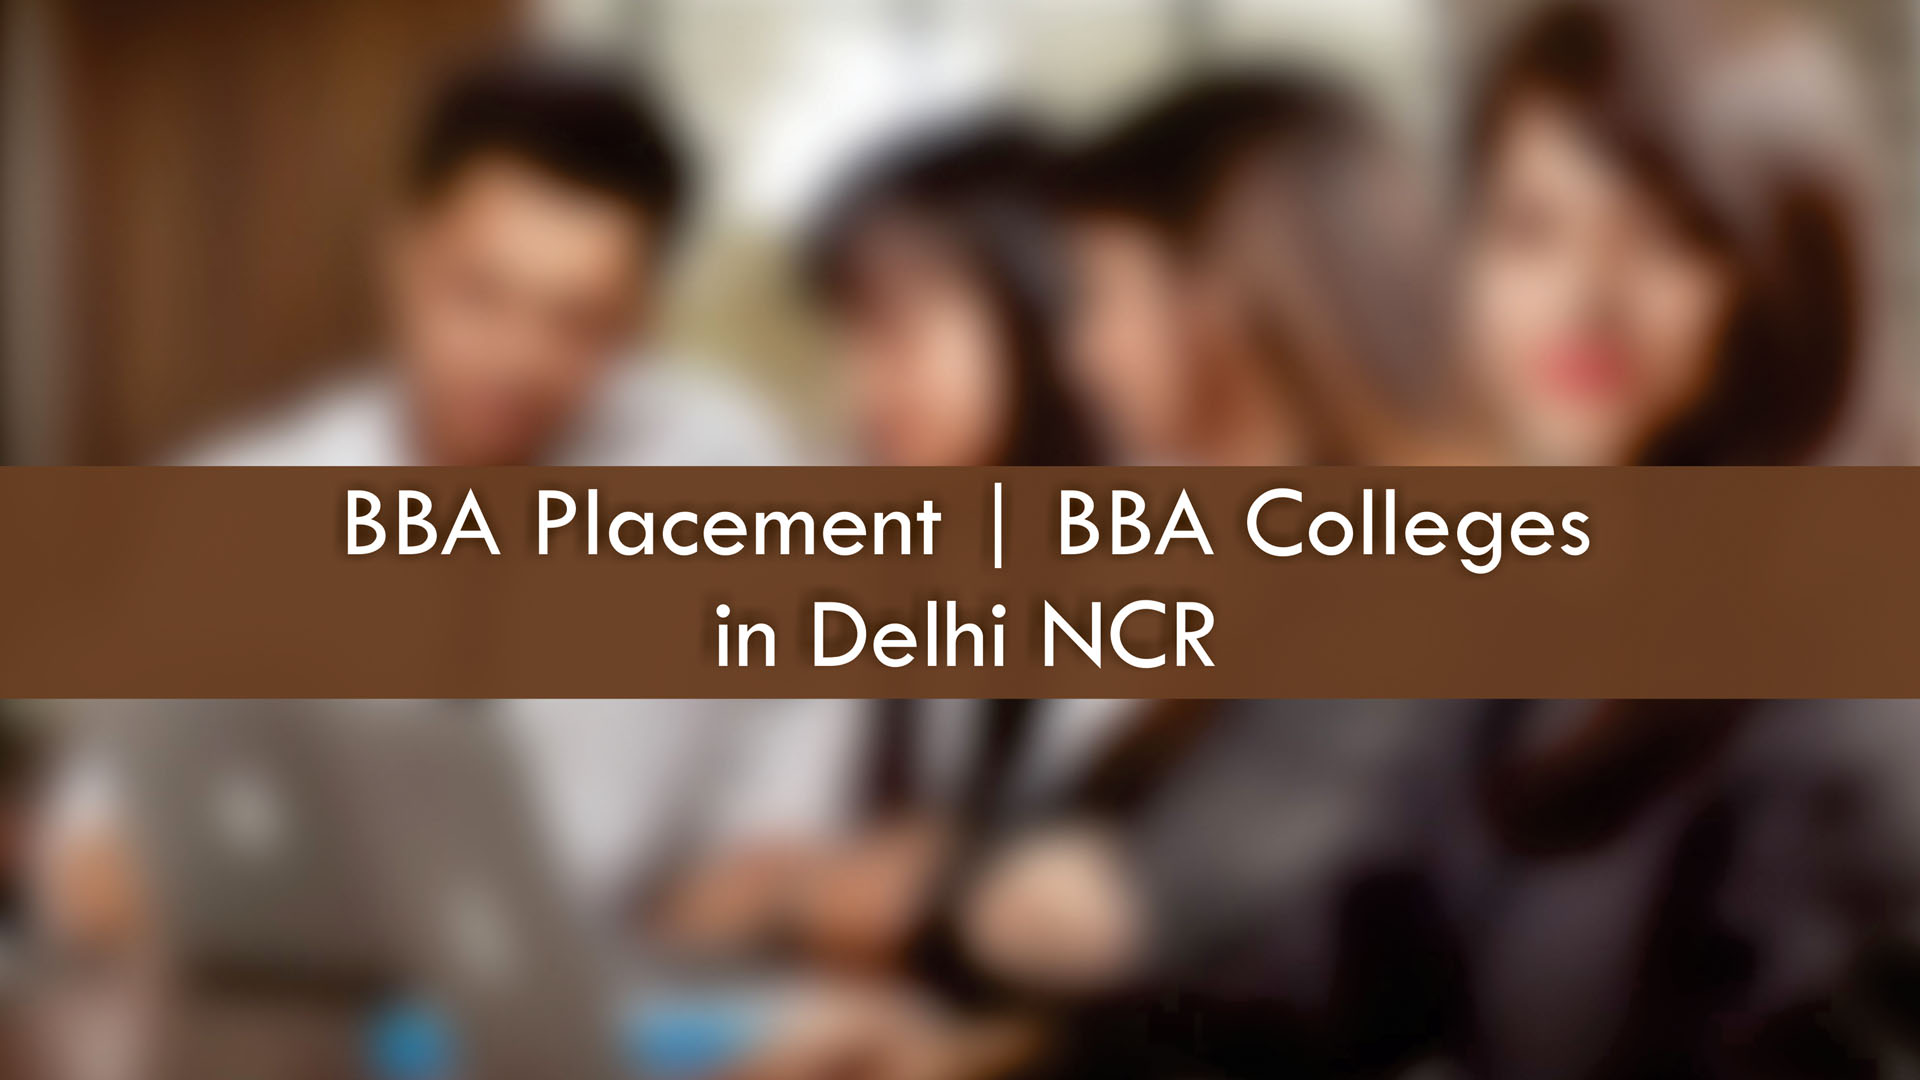 bba placement bba colleges in delhi ncr